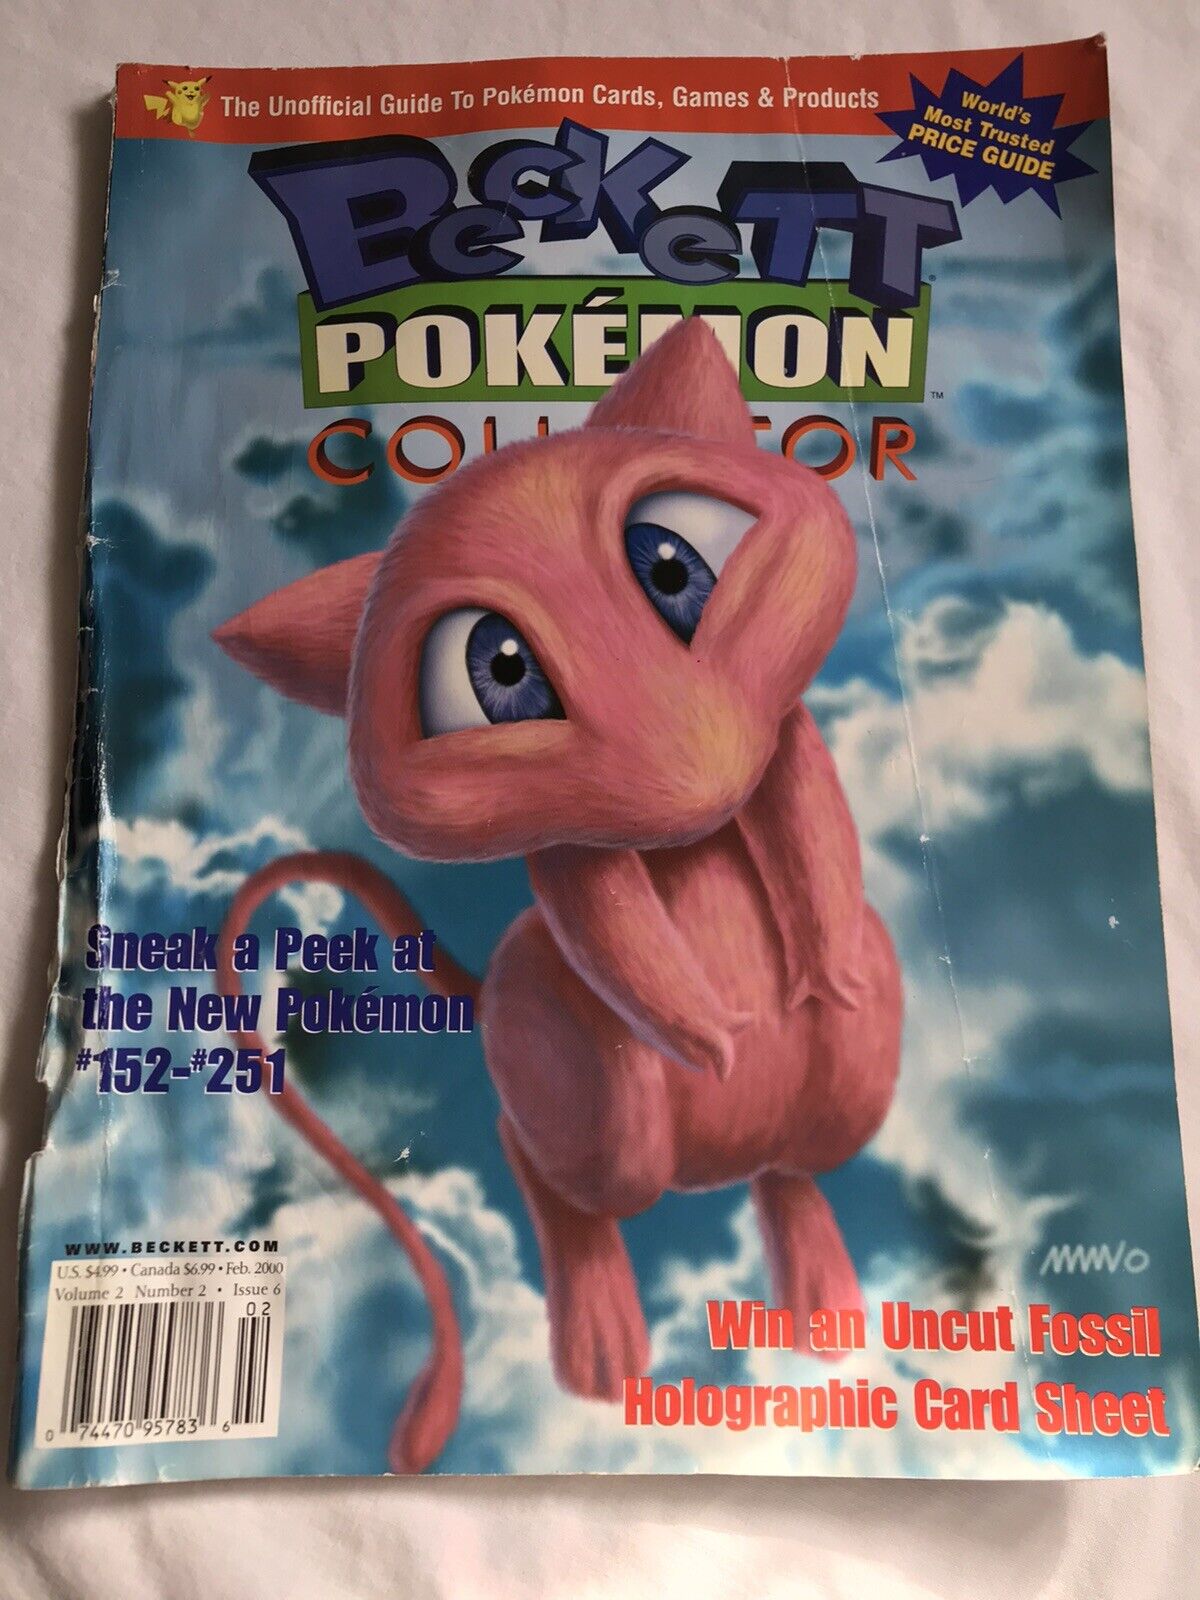 Mew Cover Pokemon Beckett Collector Magazine Feb 2000 Vol 2 Number 2 Issue 6